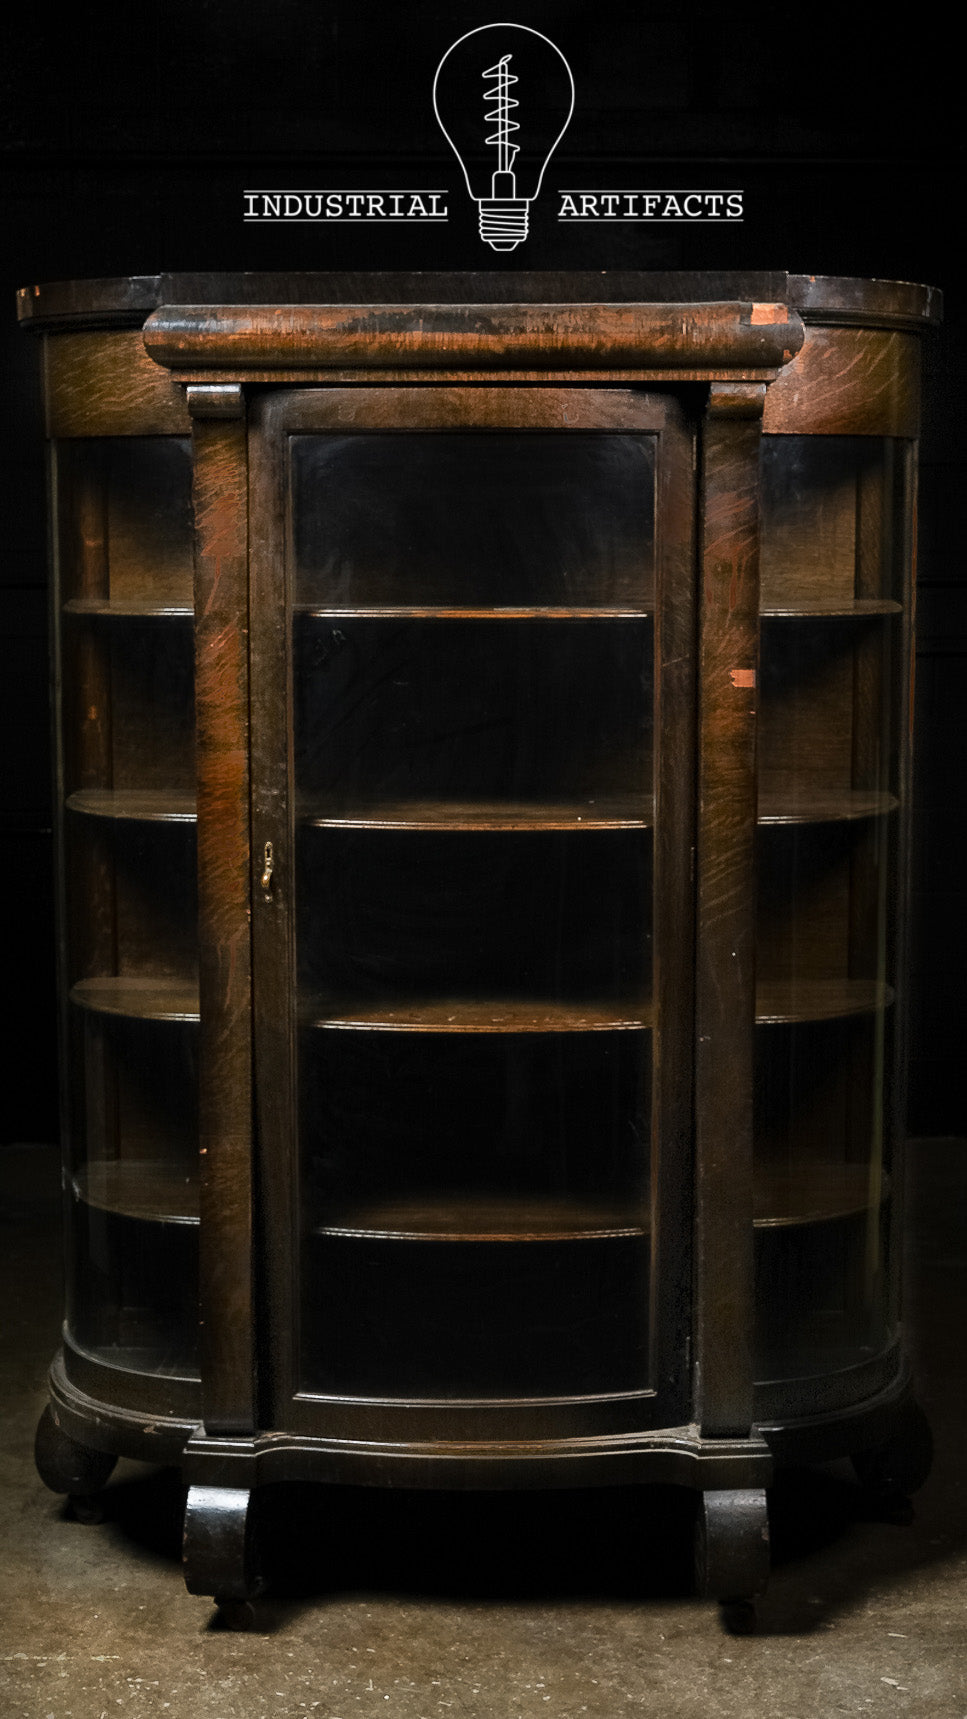 Early American Empire Rounded Display Case by Rockford Furniture Co